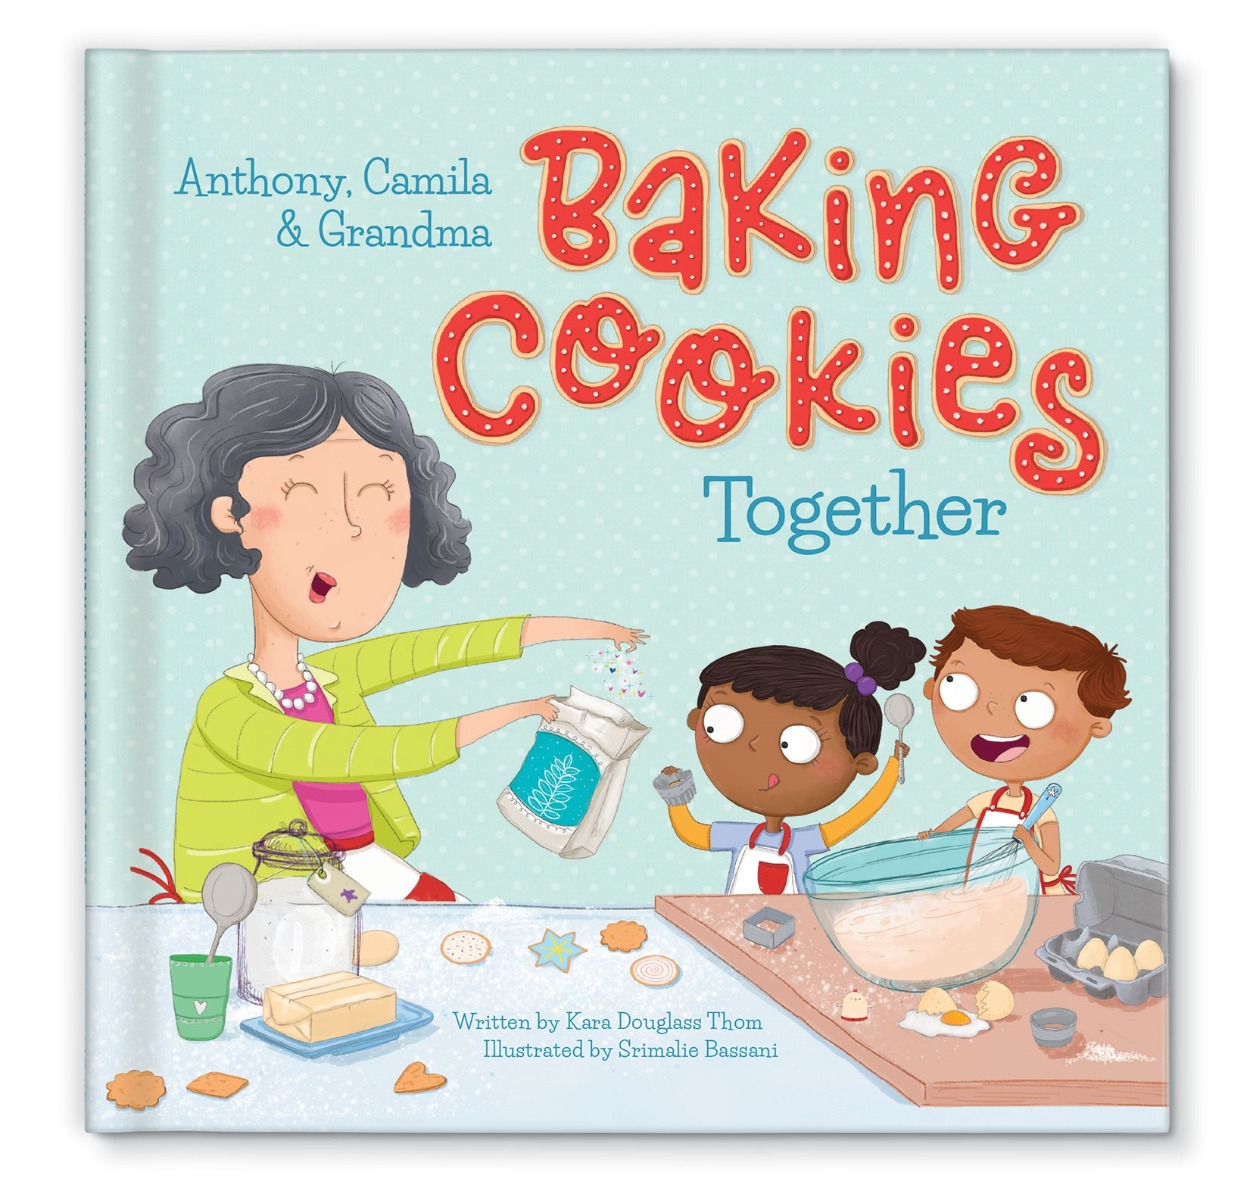 Baking Cookies Together Personalized Book